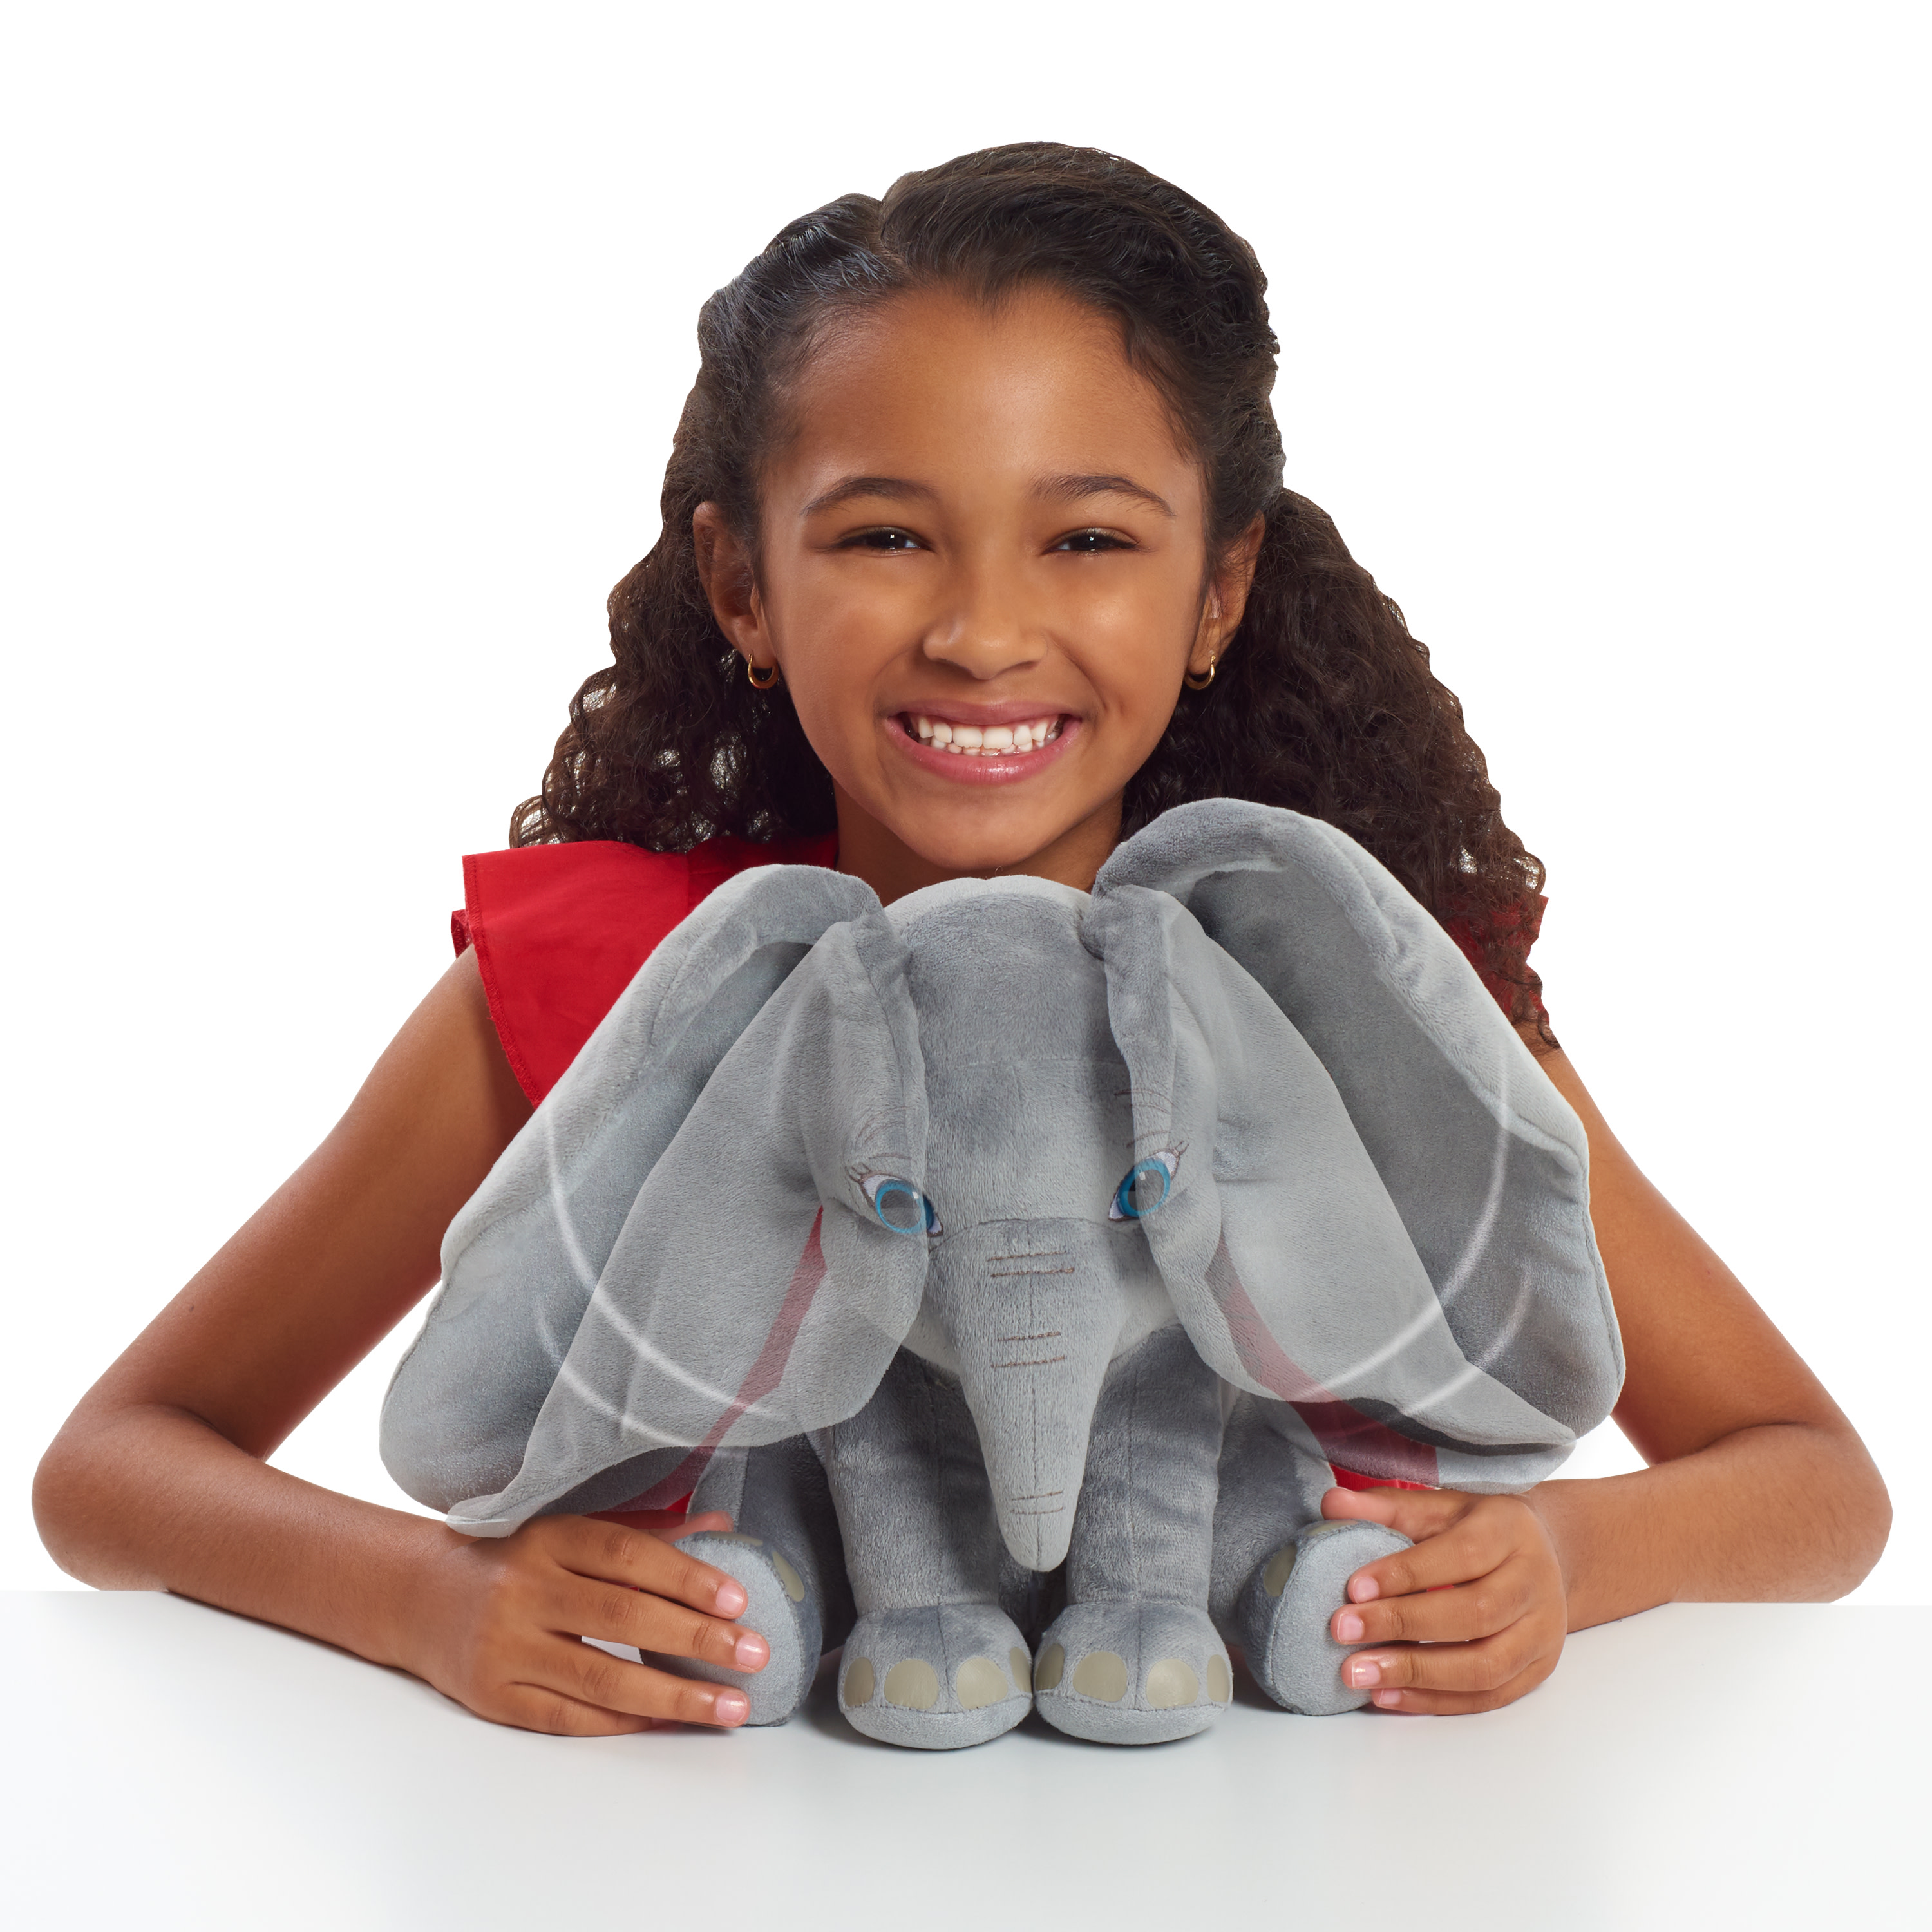 Disney's Dumbo Fluttering Ears, Dumbo, Officially Licensed Kids Toys for Ages 3 Up, Gifts and Presents - image 2 of 4